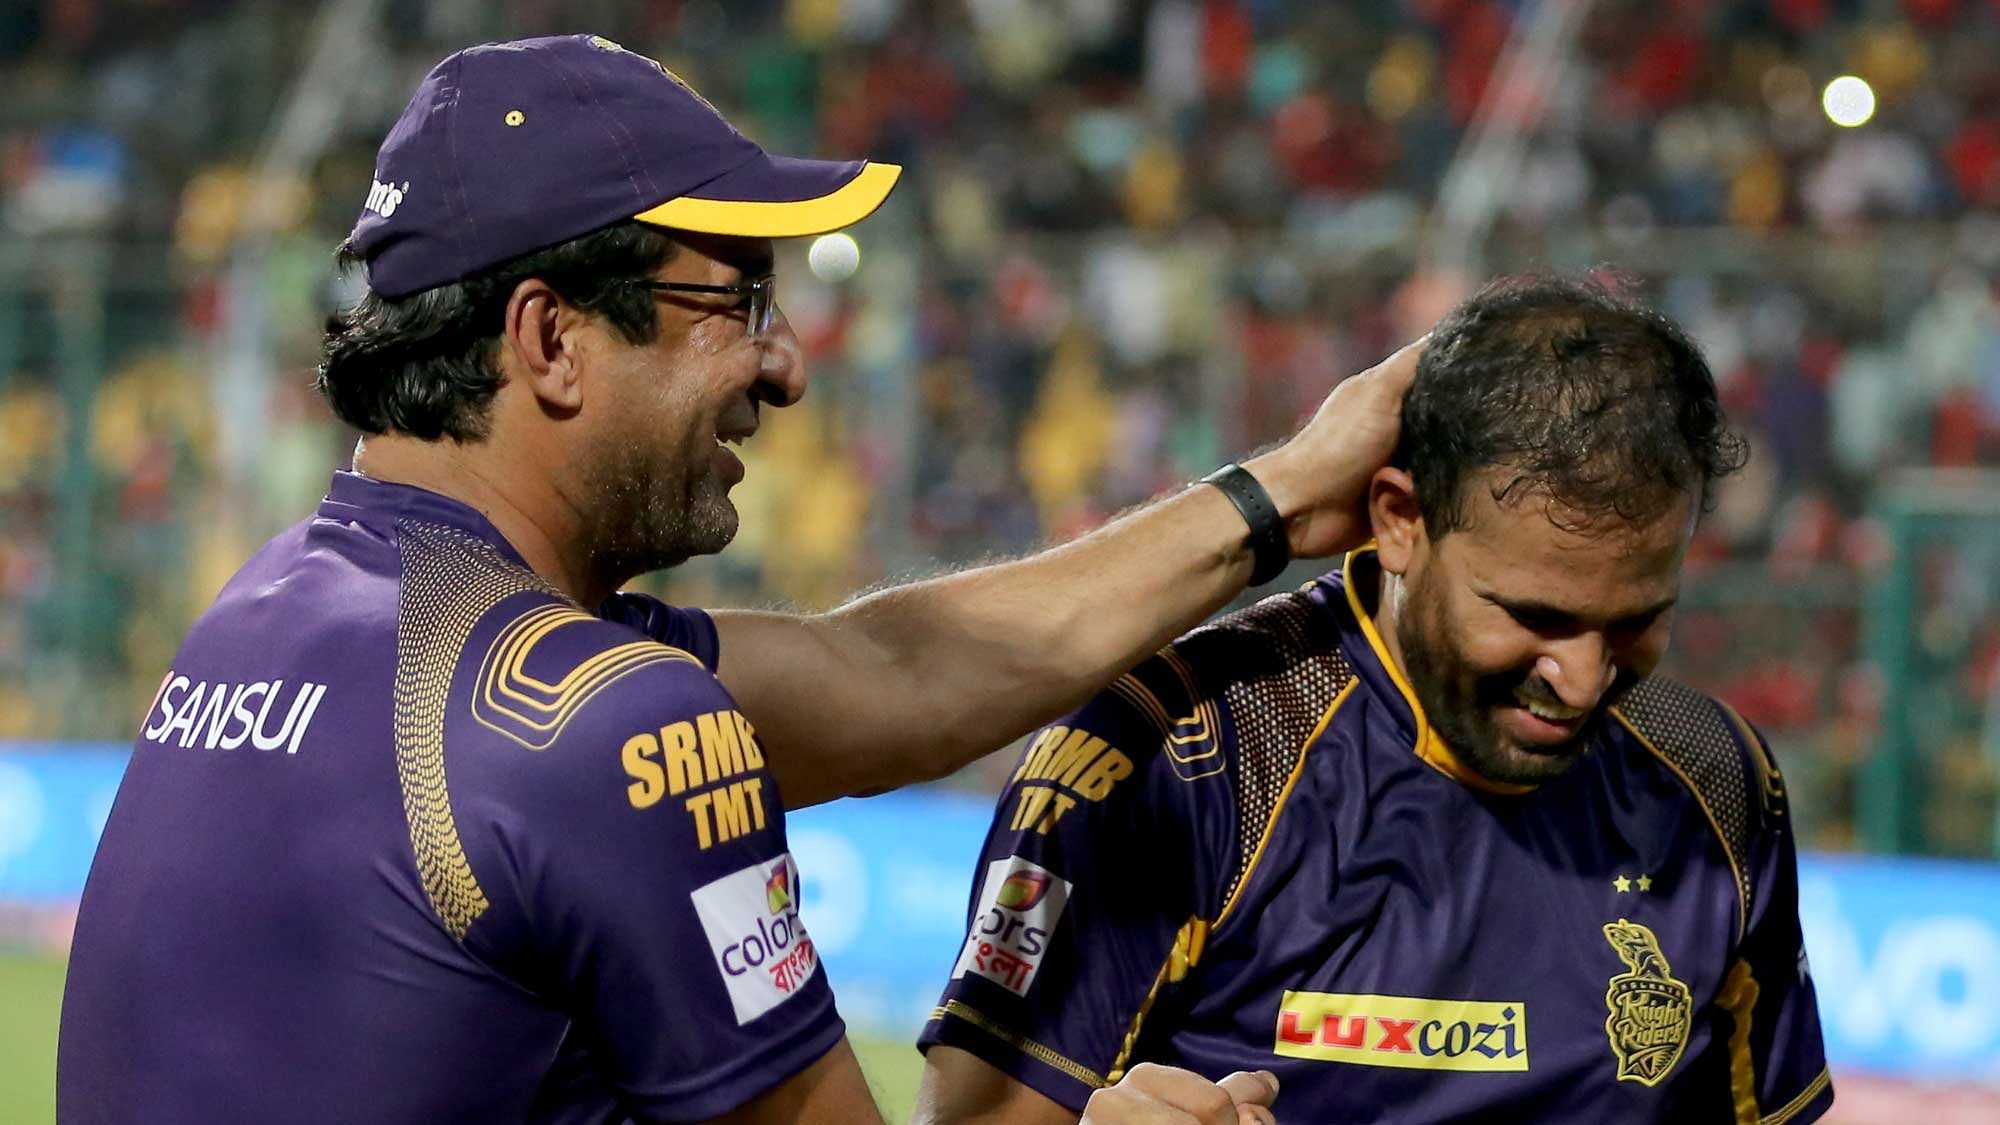 Wasim Akram highlighted the differences between the Indian Premier League (IPL) and Pakistan Super League (PSL).